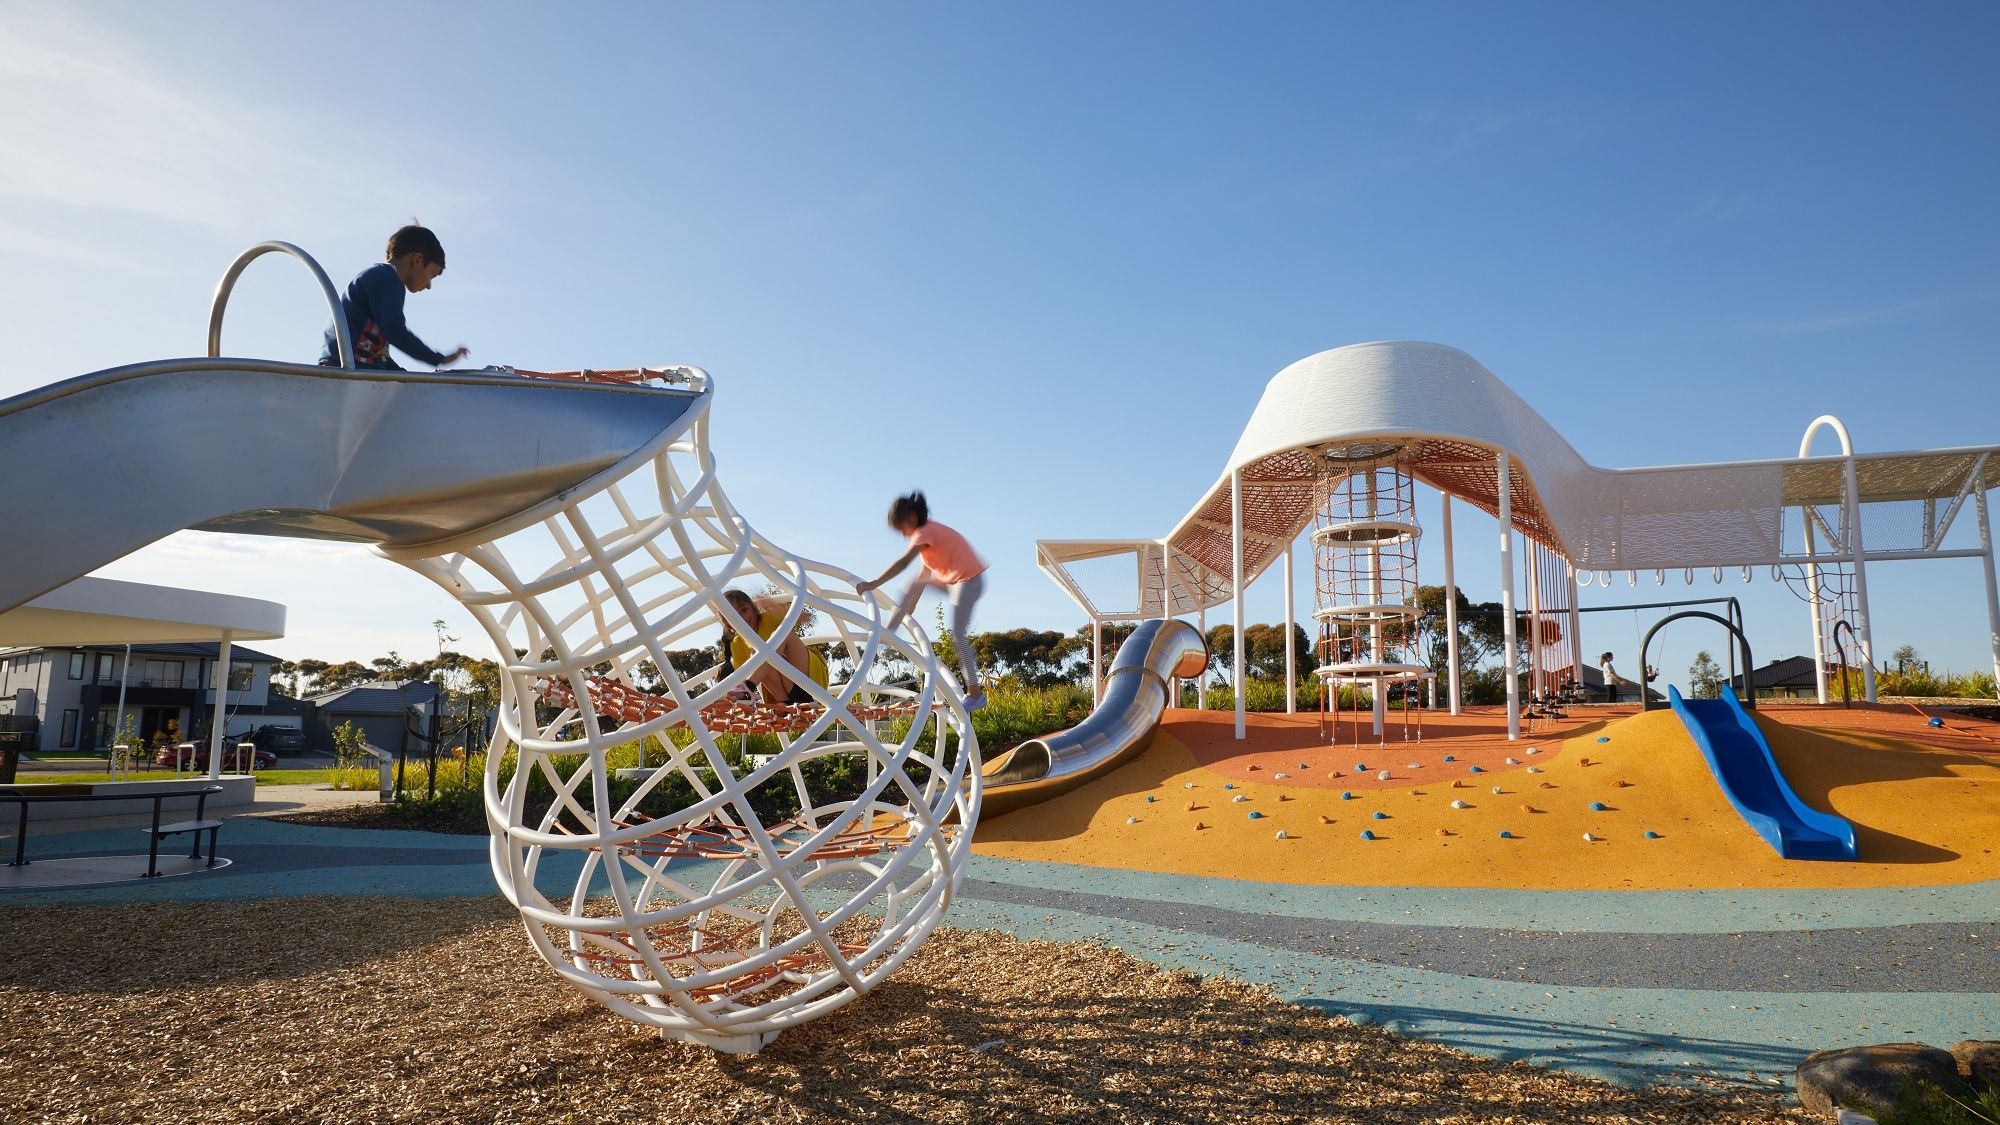 A gum-nut shaped metal structure that forms a ladder for a small slide